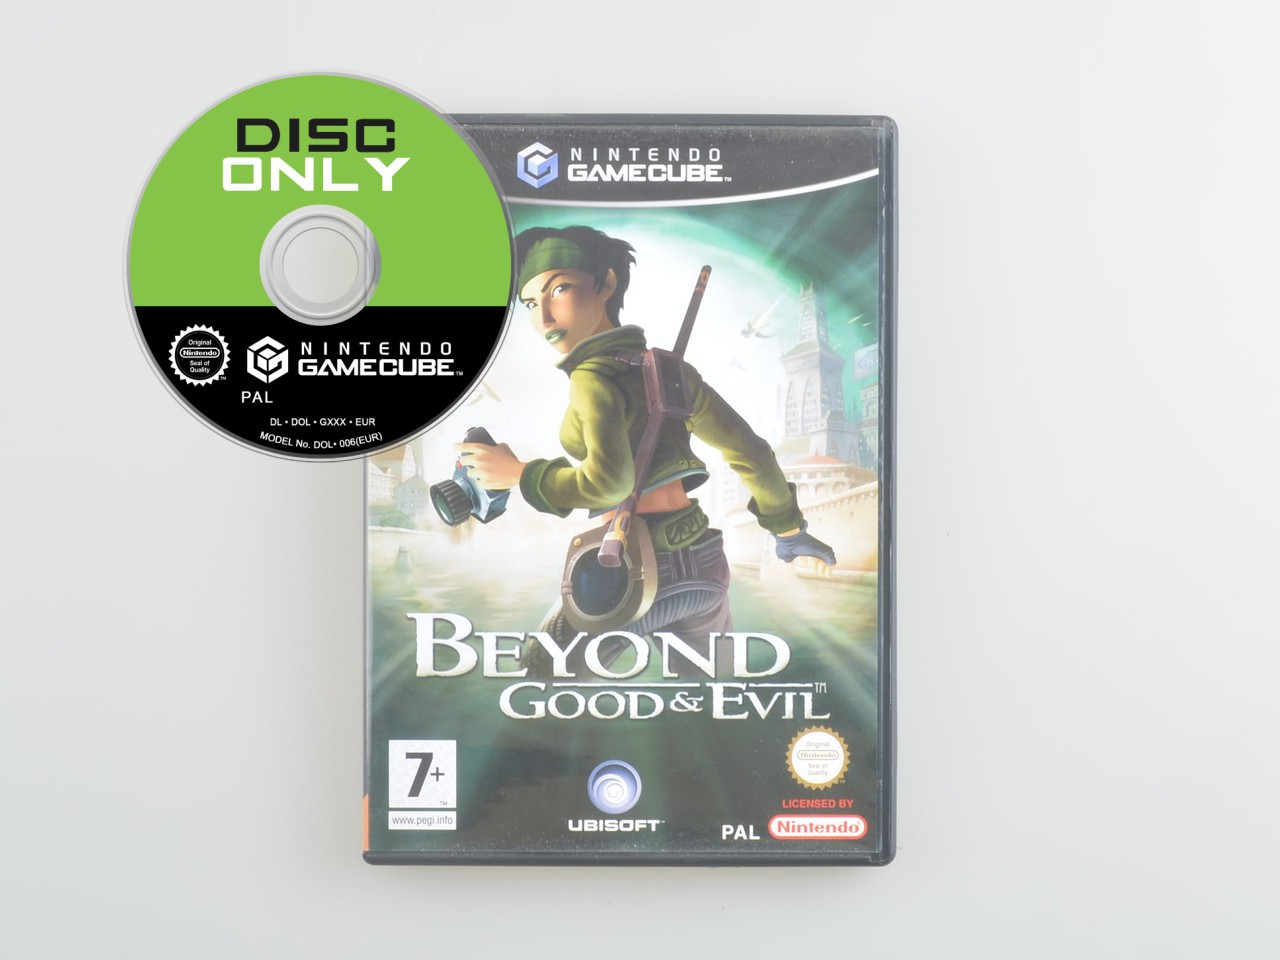 Beyond Good & Evil - Disc Only - Gamecube Games